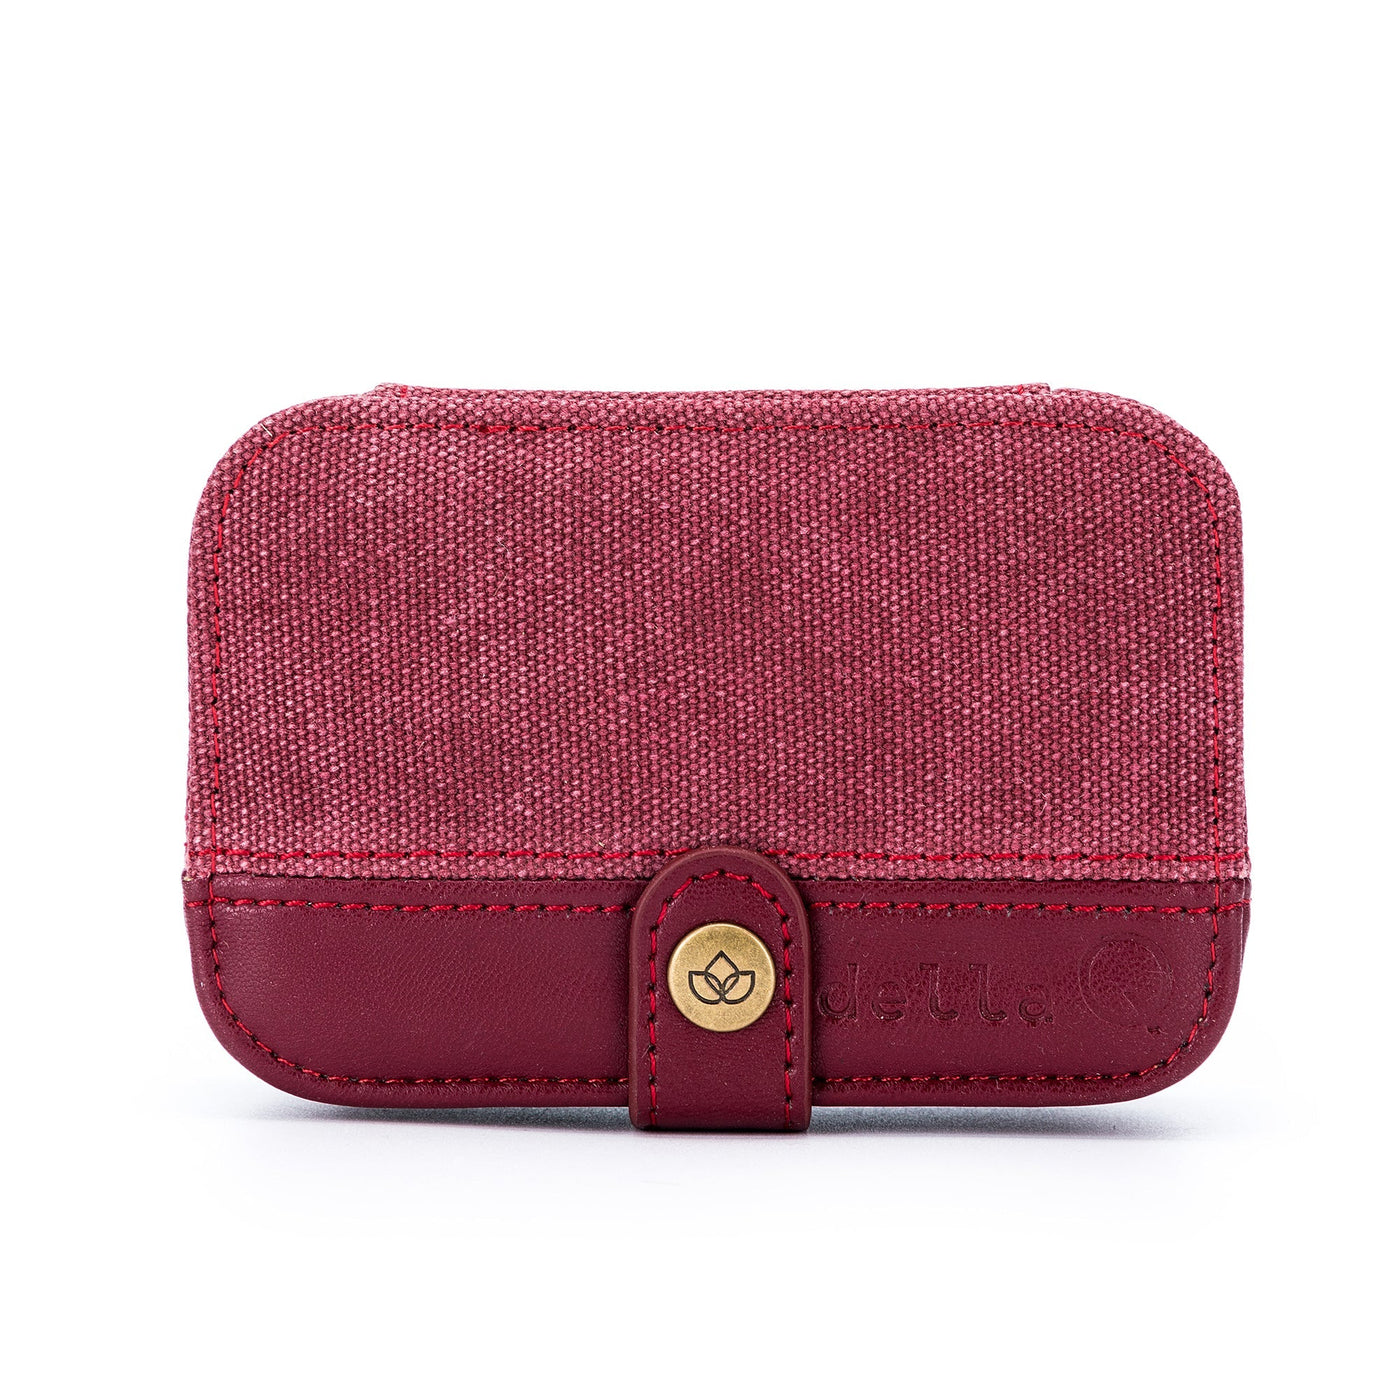 makers-buddy-case-maroon